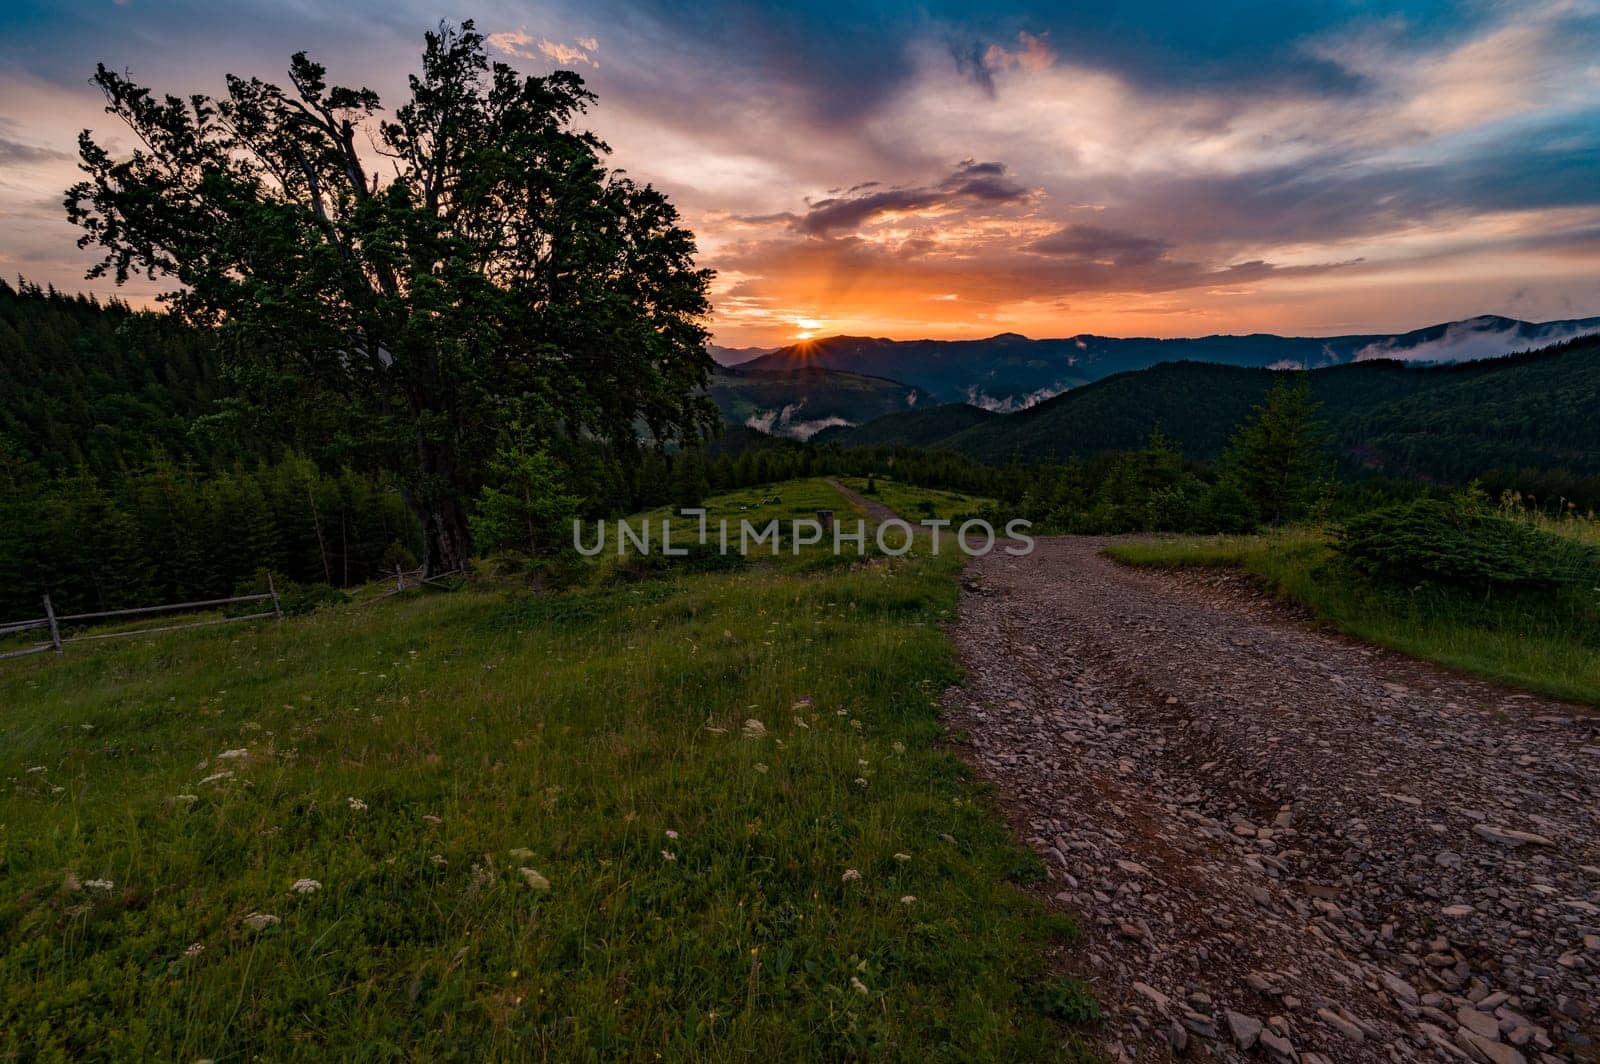 Magical dawn in the Carpathians, in the foreground a road for tourists, fabulous dawns in the mountains.